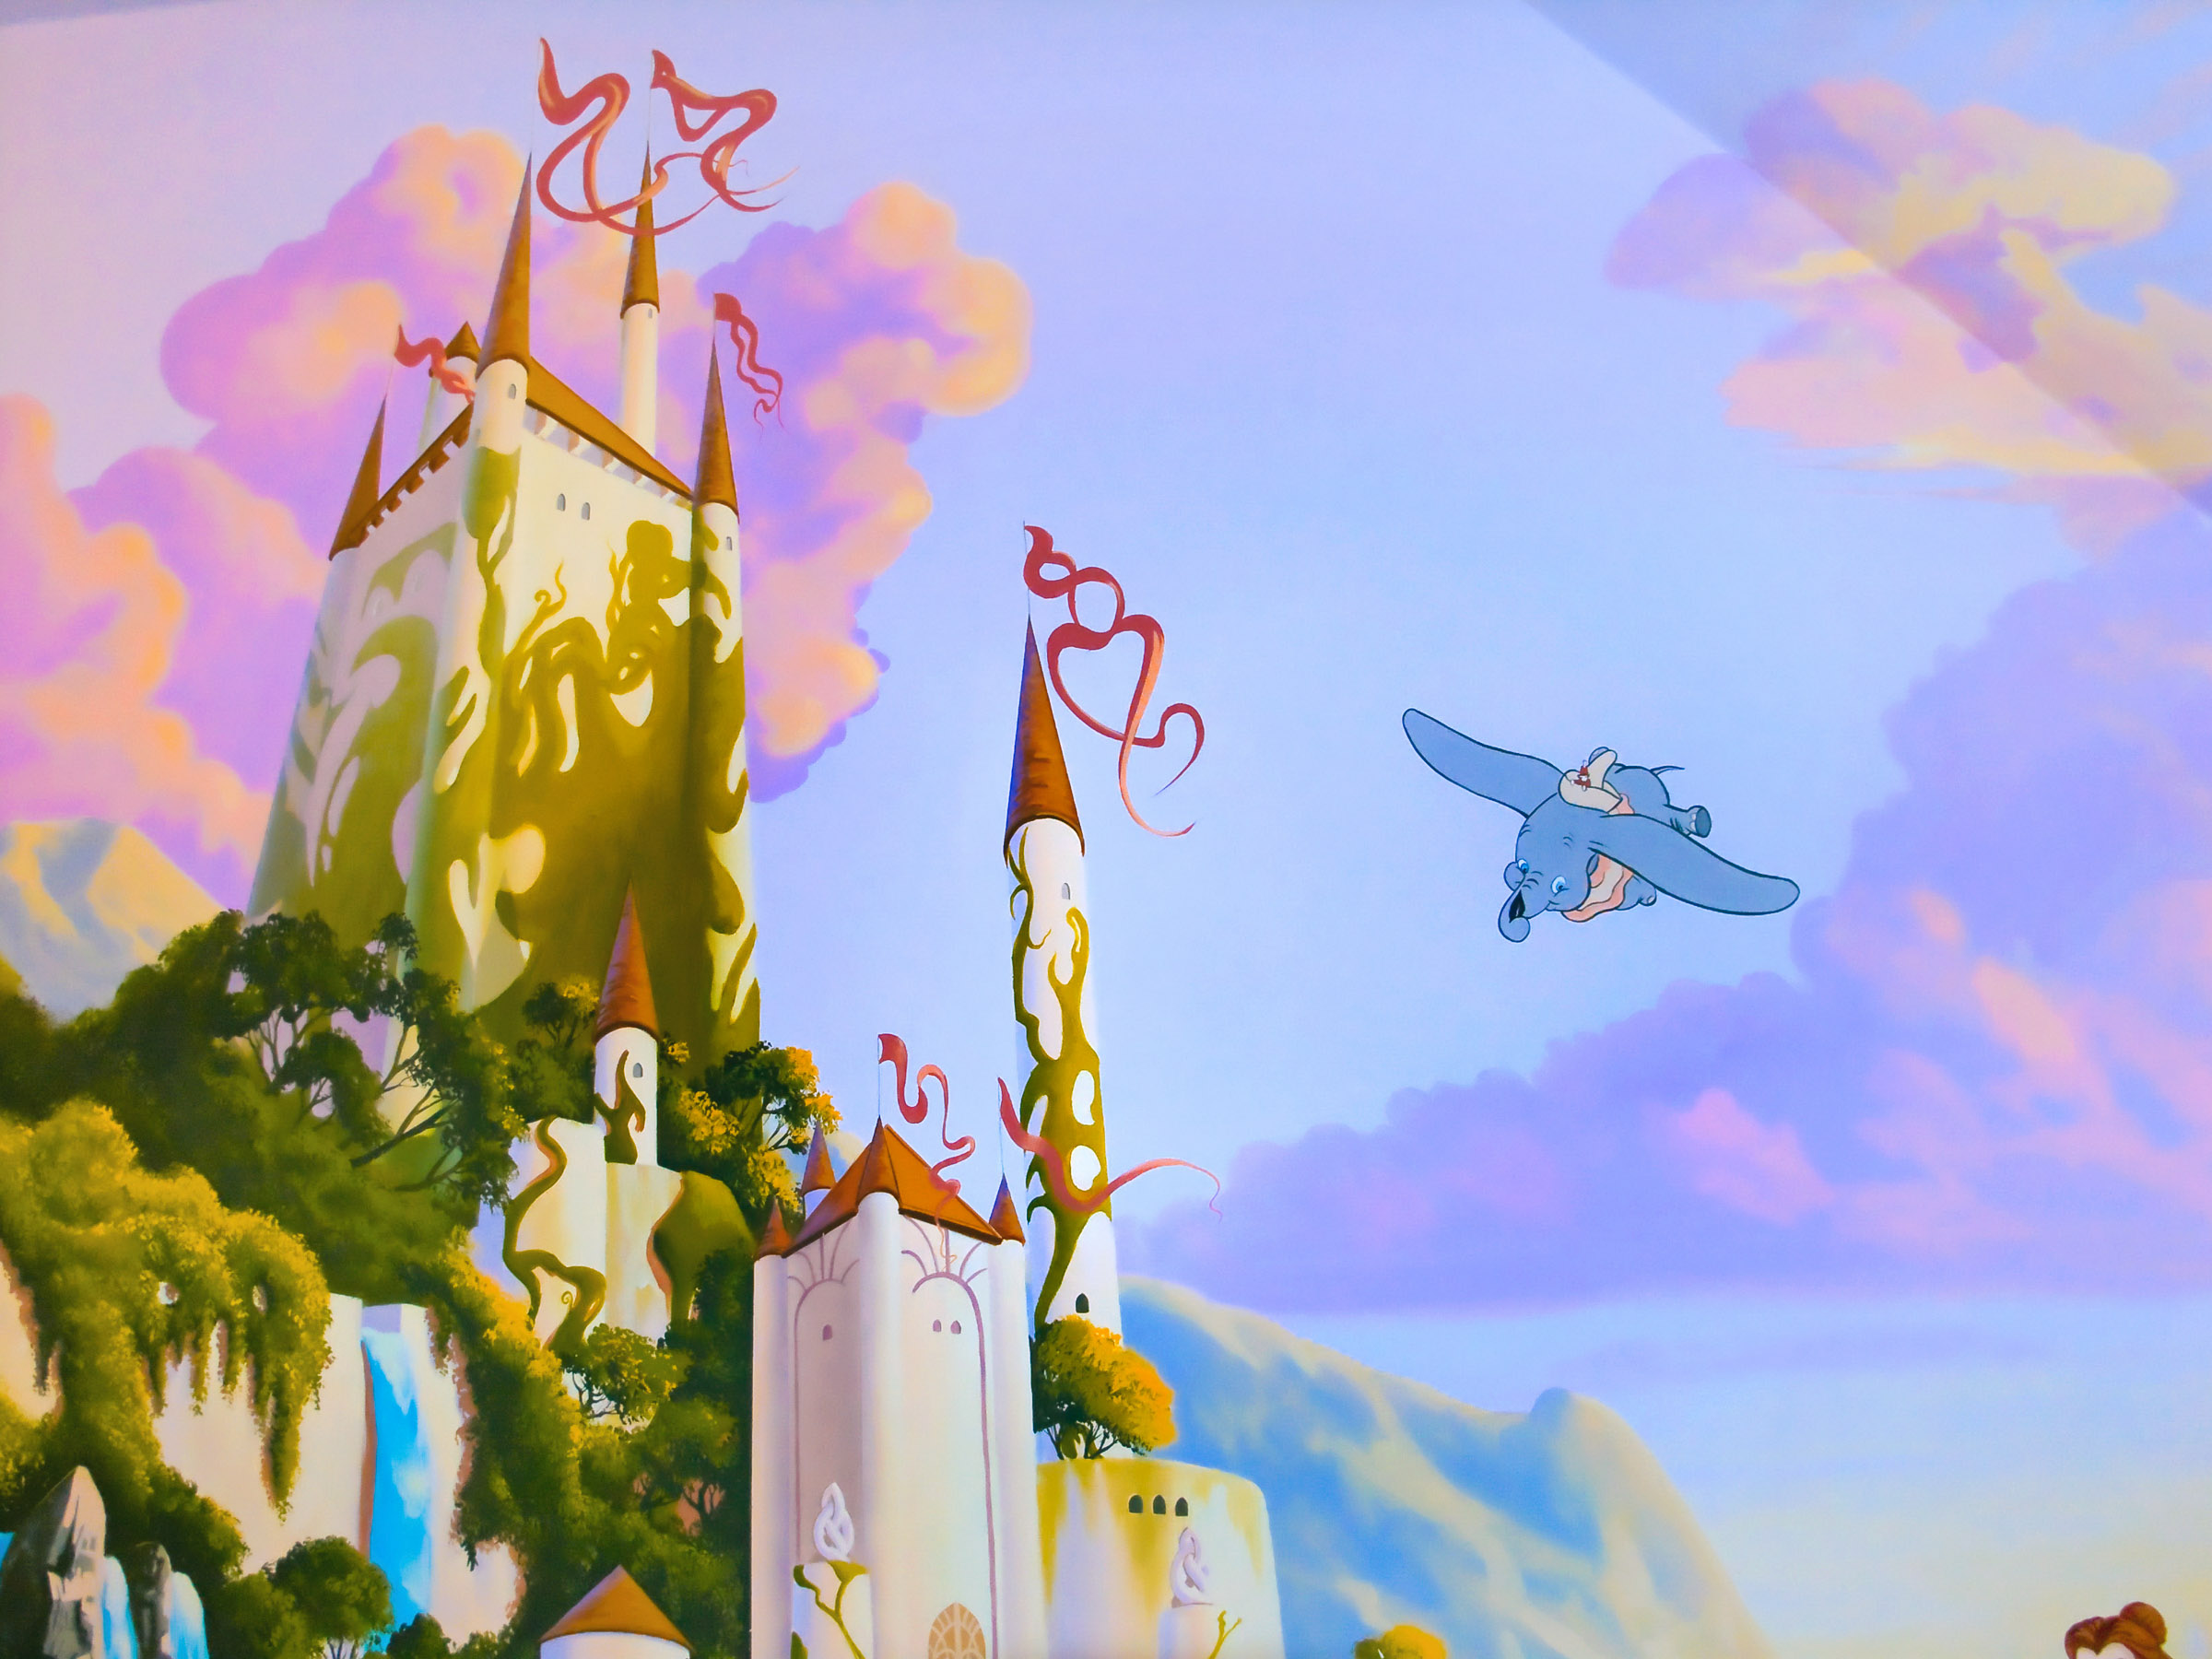 The Enchanted Castle Top featuring Dumbo